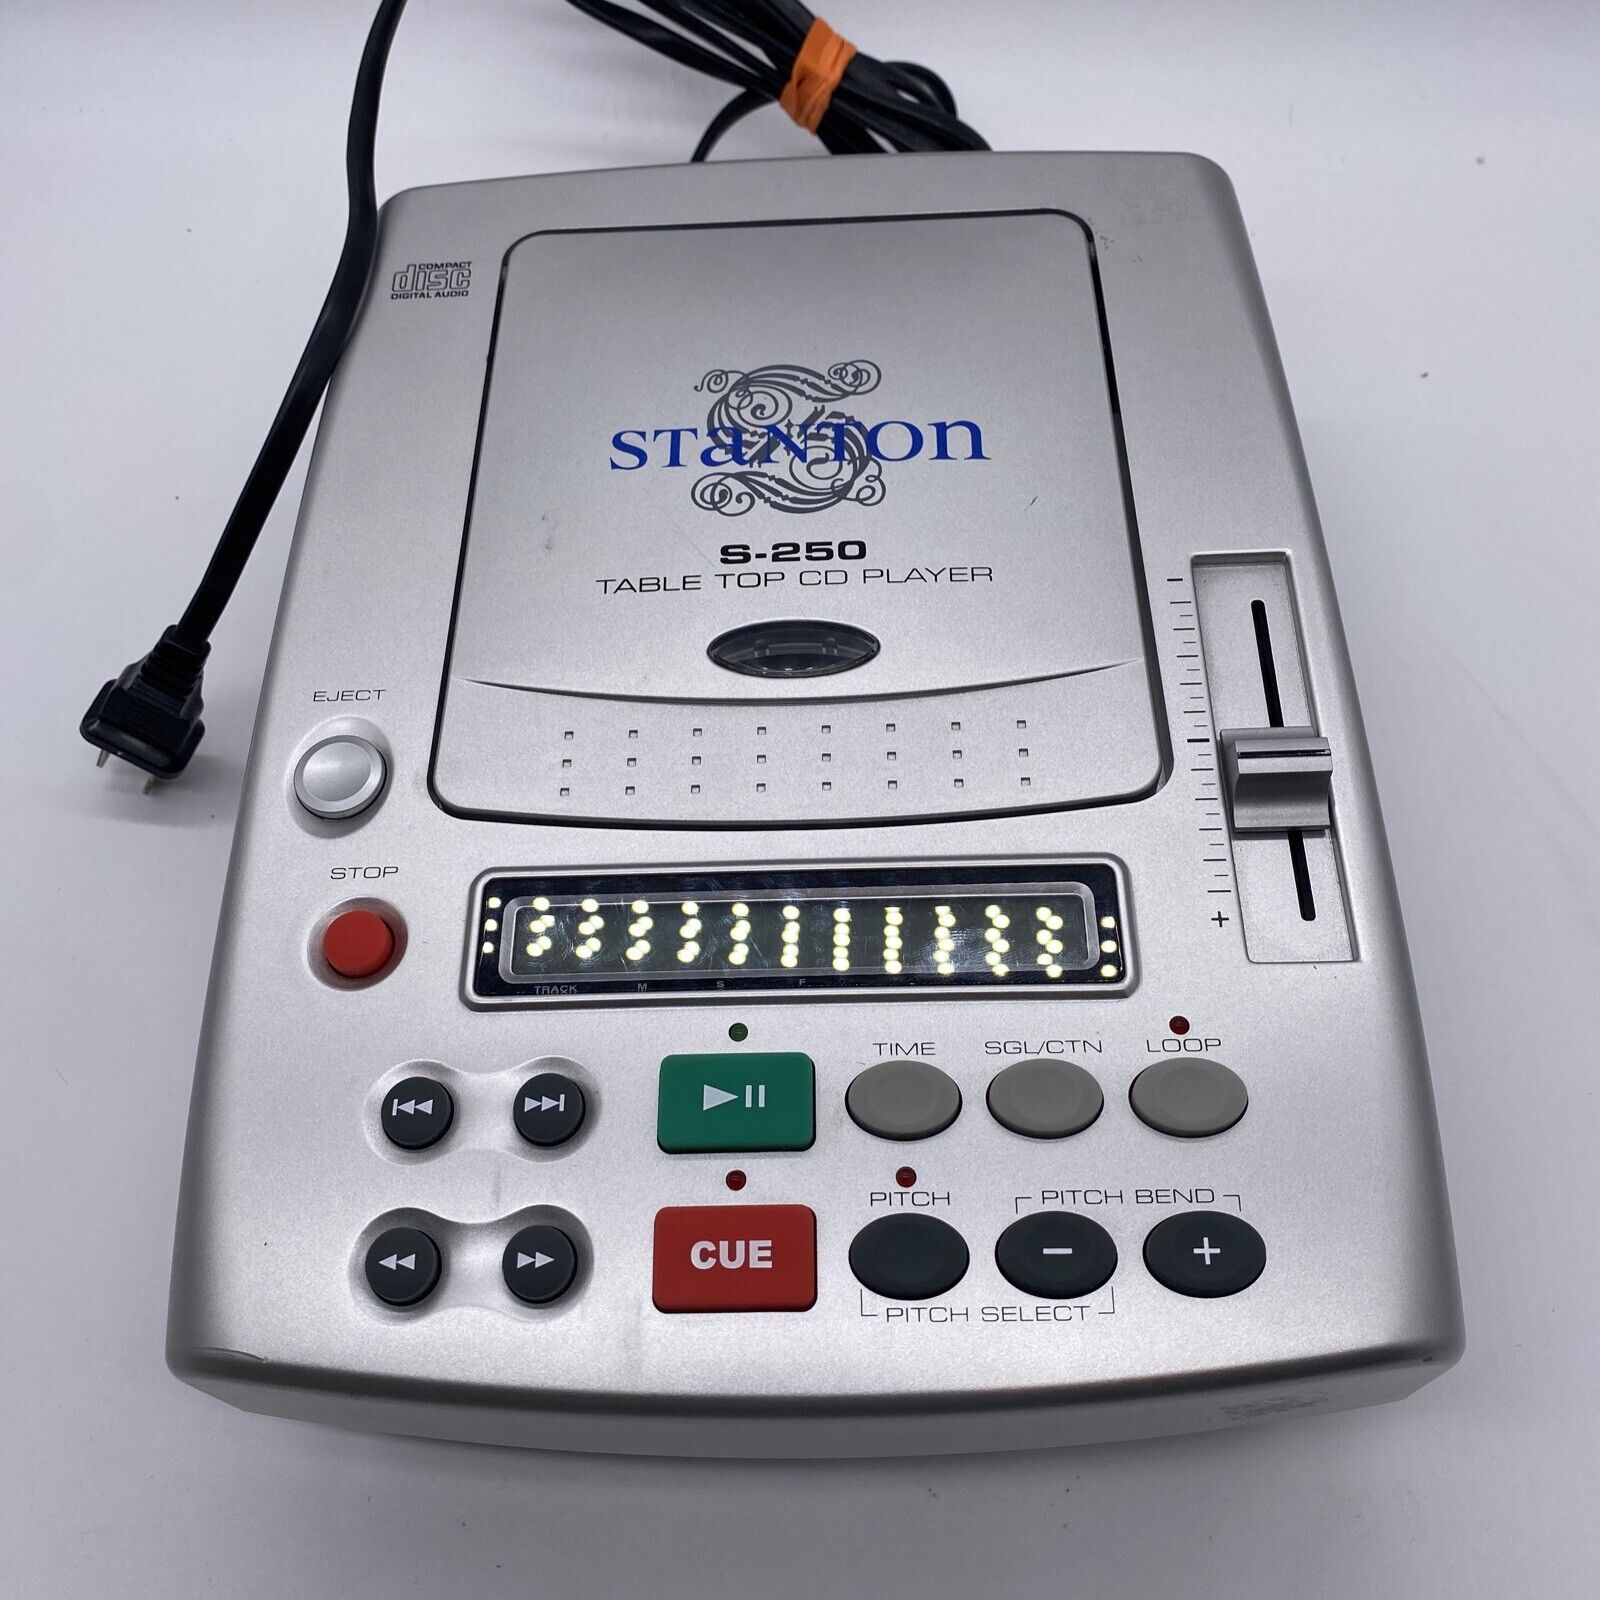 Stanton S-250 Tabletop Dj Cd Player /pitch Control- Includes Power Cord